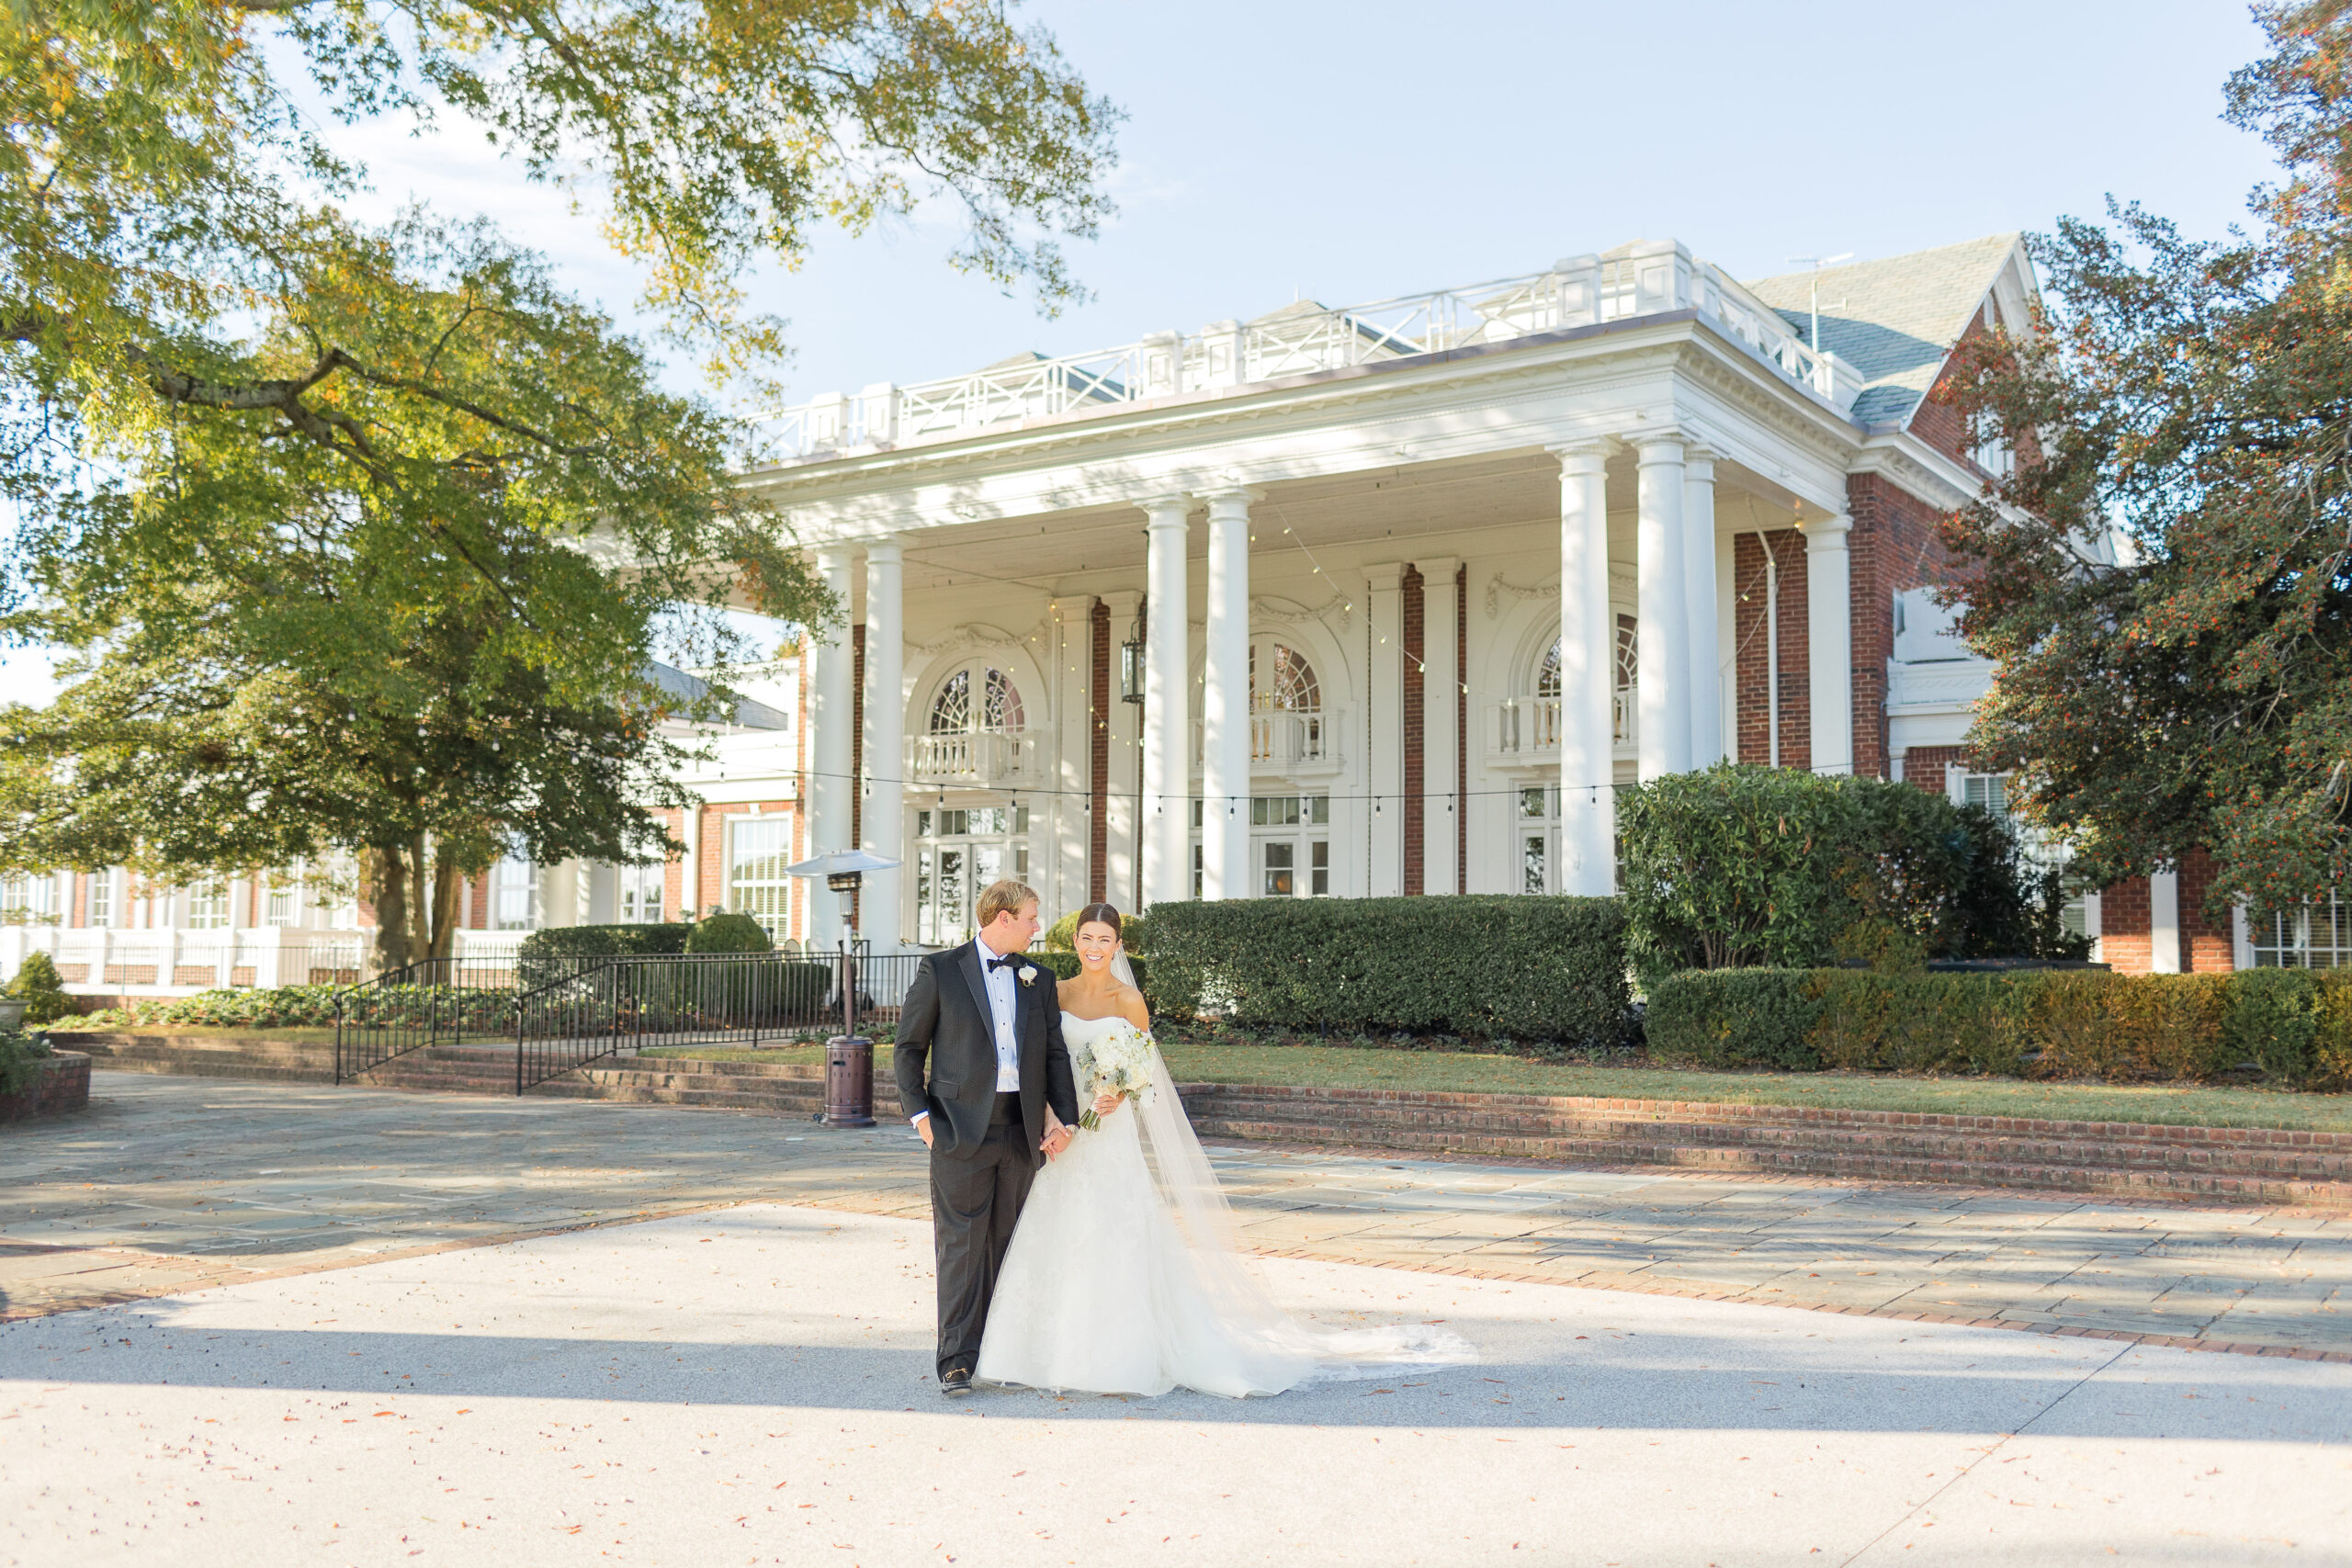 Wedding at the Country Club of Virginia